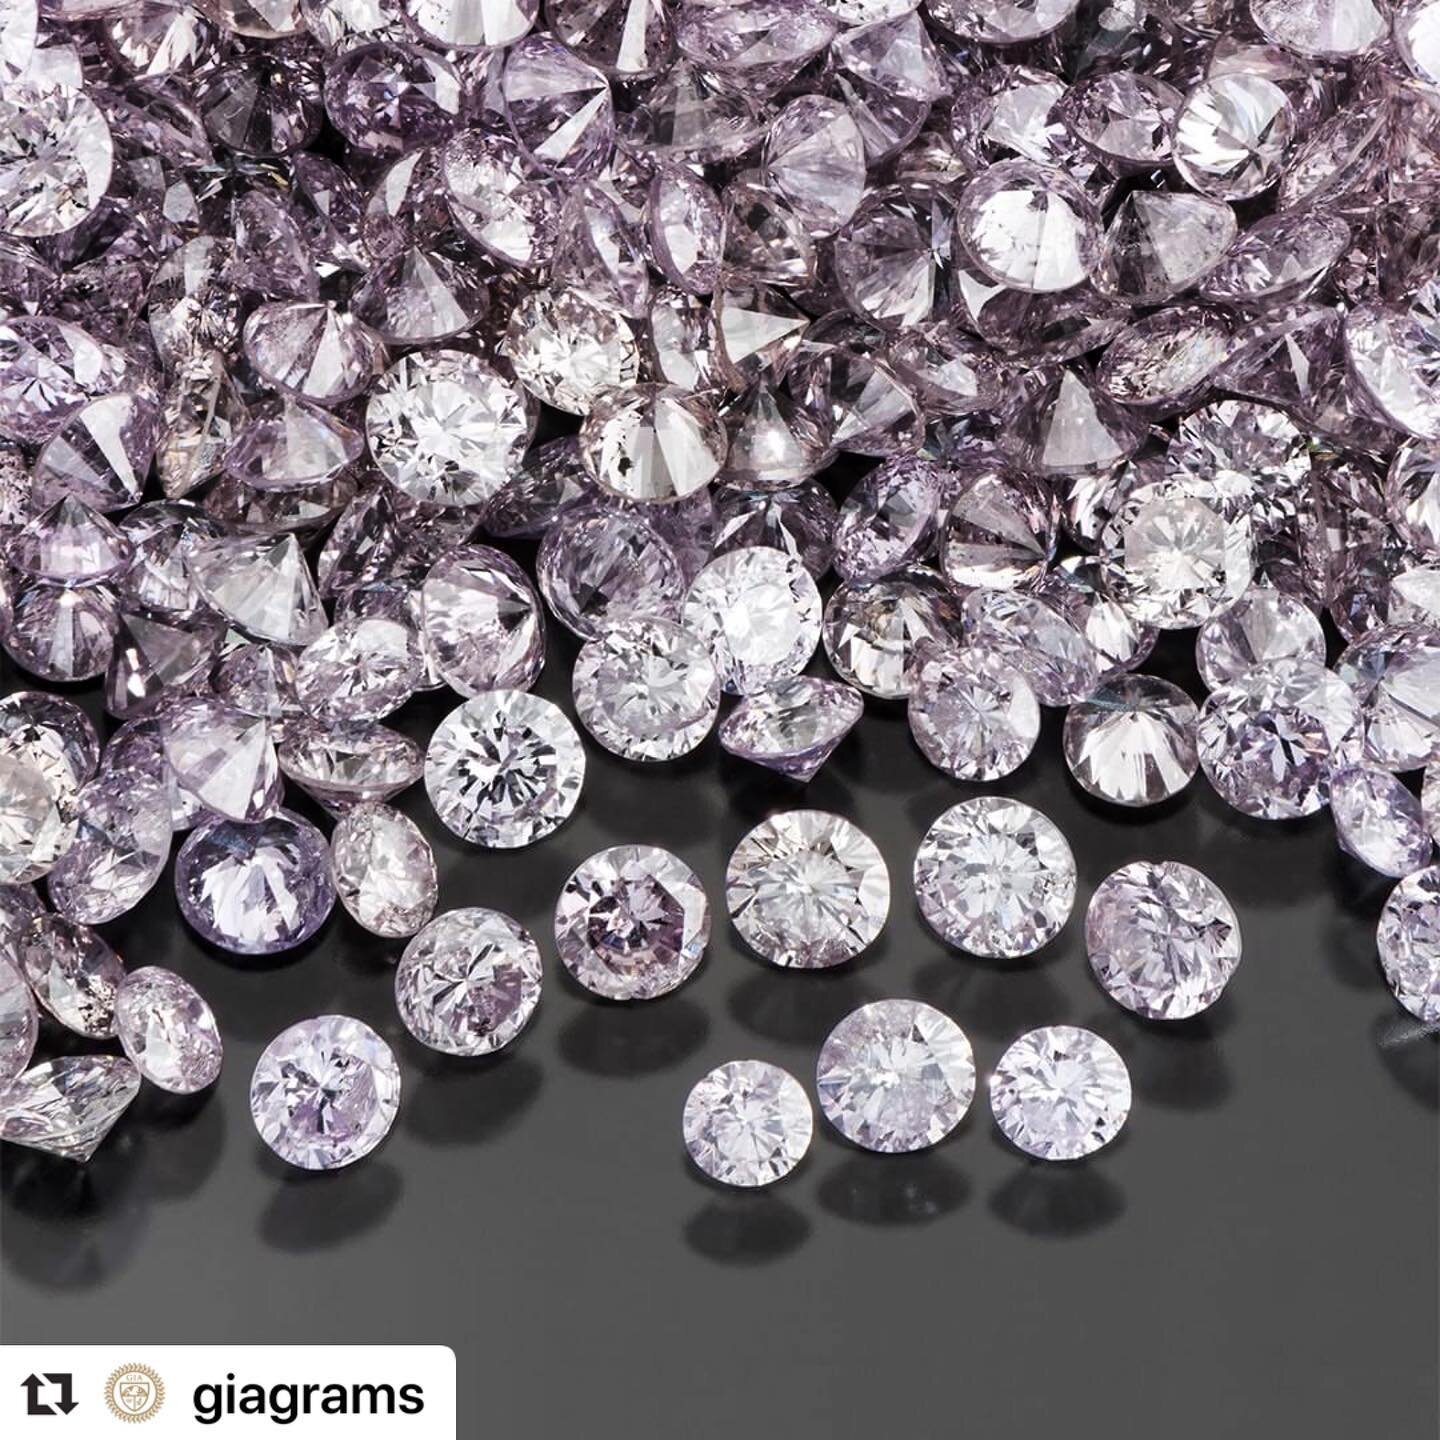 Interesting post by @giagrams check them out... we love the fancy ones! ❤️❤️❤️ #jsampieri
・・・
These purplish pink beauties are from the Lomonosov mine in Russia. The Lomonosov mine is special in that it produces a relatively high percentage of fancy 